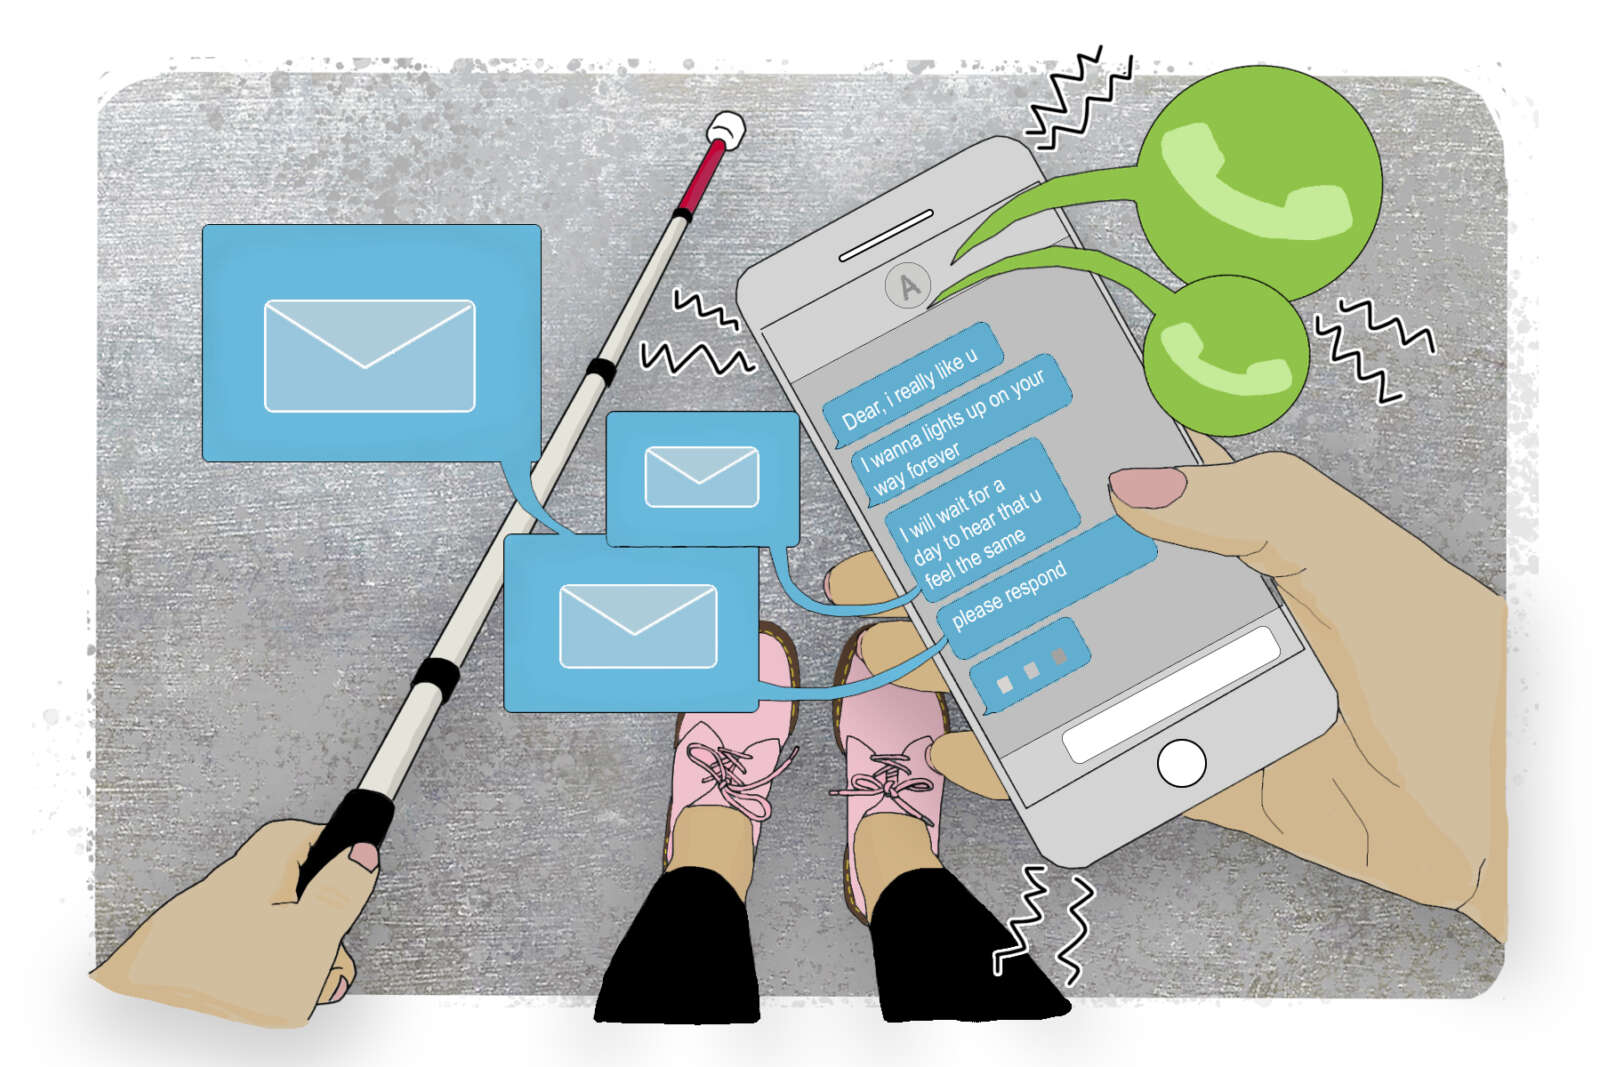 Drawing - woman with cane holds phone with messages popping up